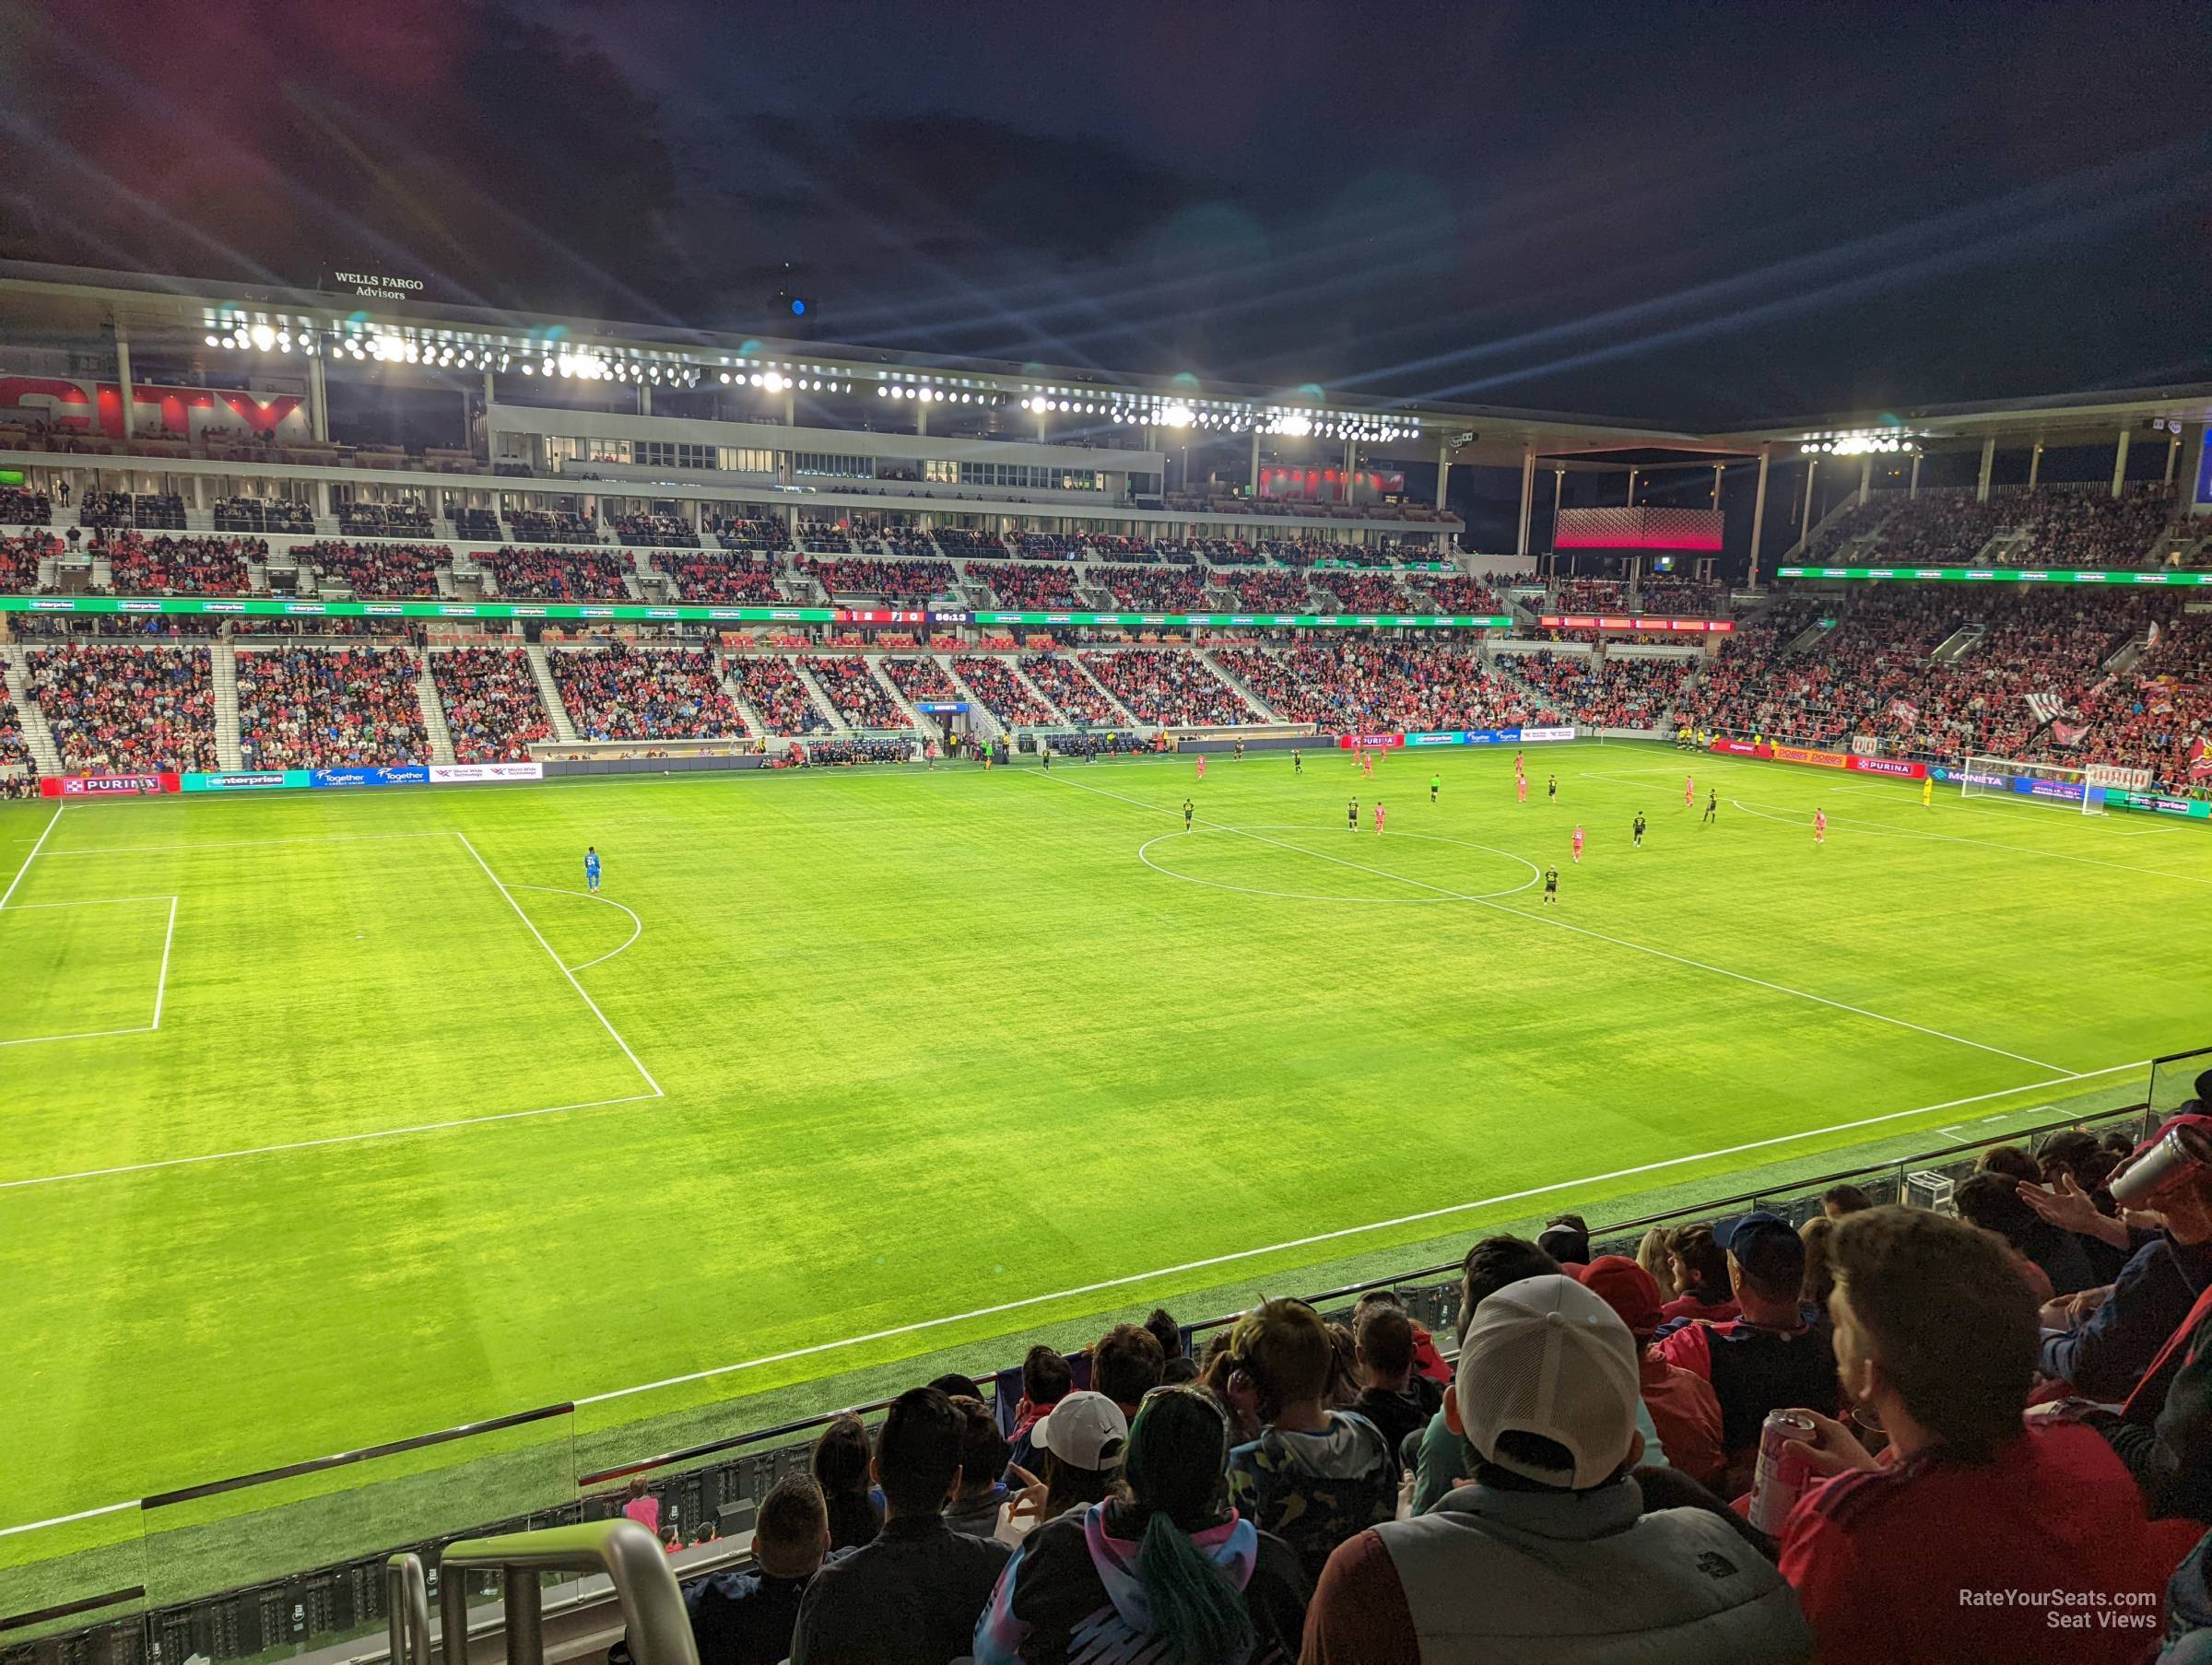 section 202, row 6 seat view  - citypark